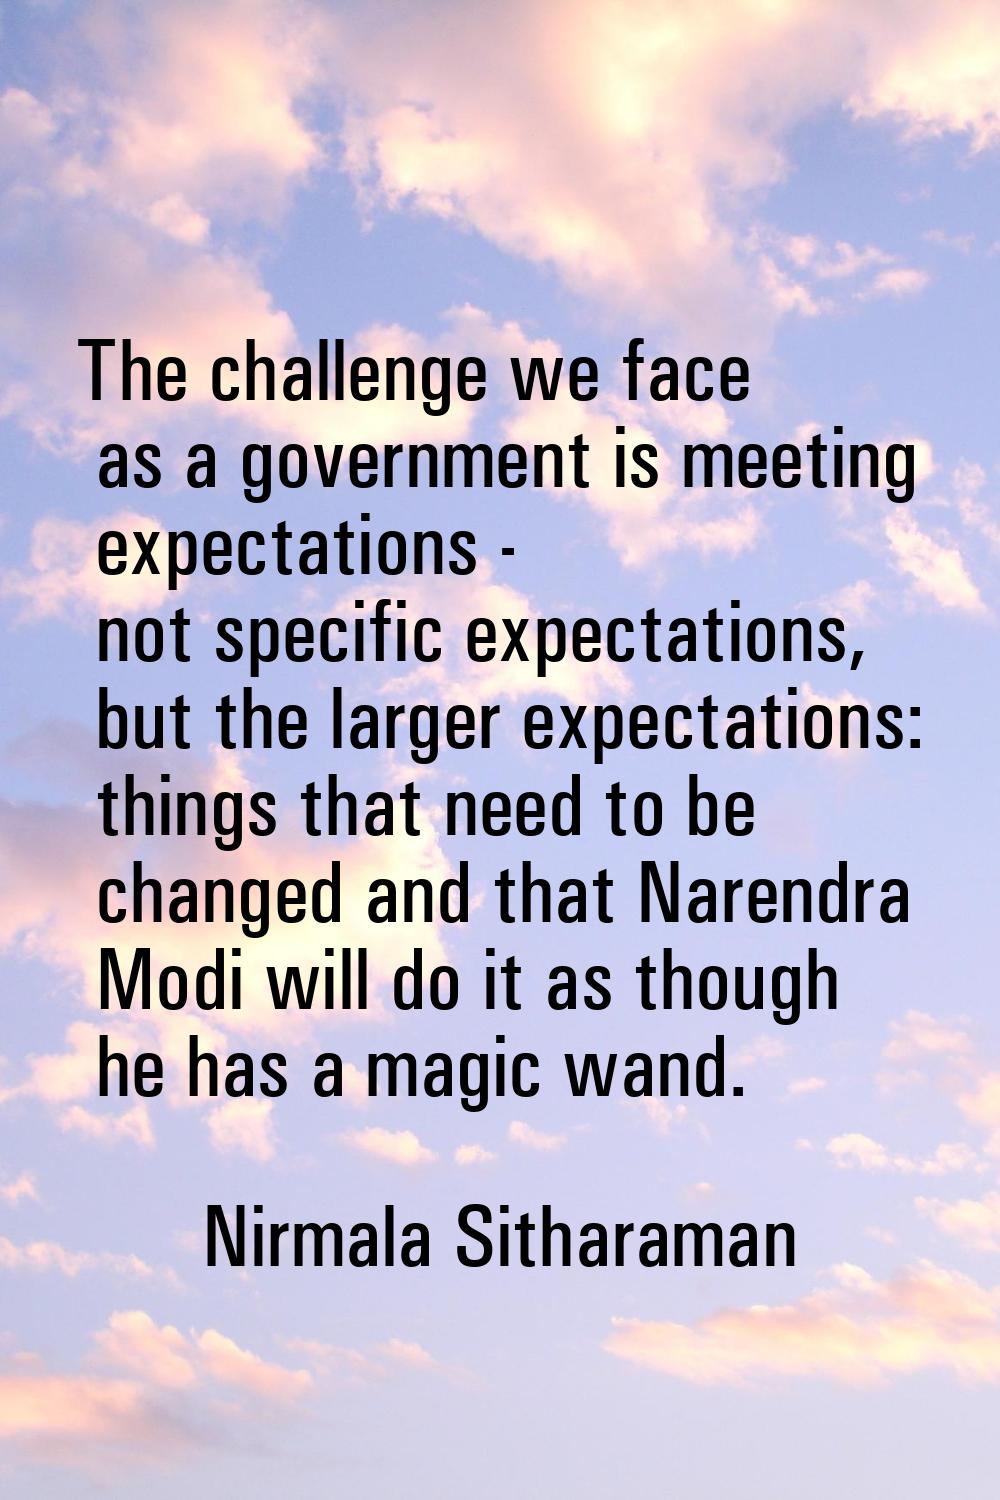 The challenge we face as a government is meeting expectations - not specific expectations, but the 